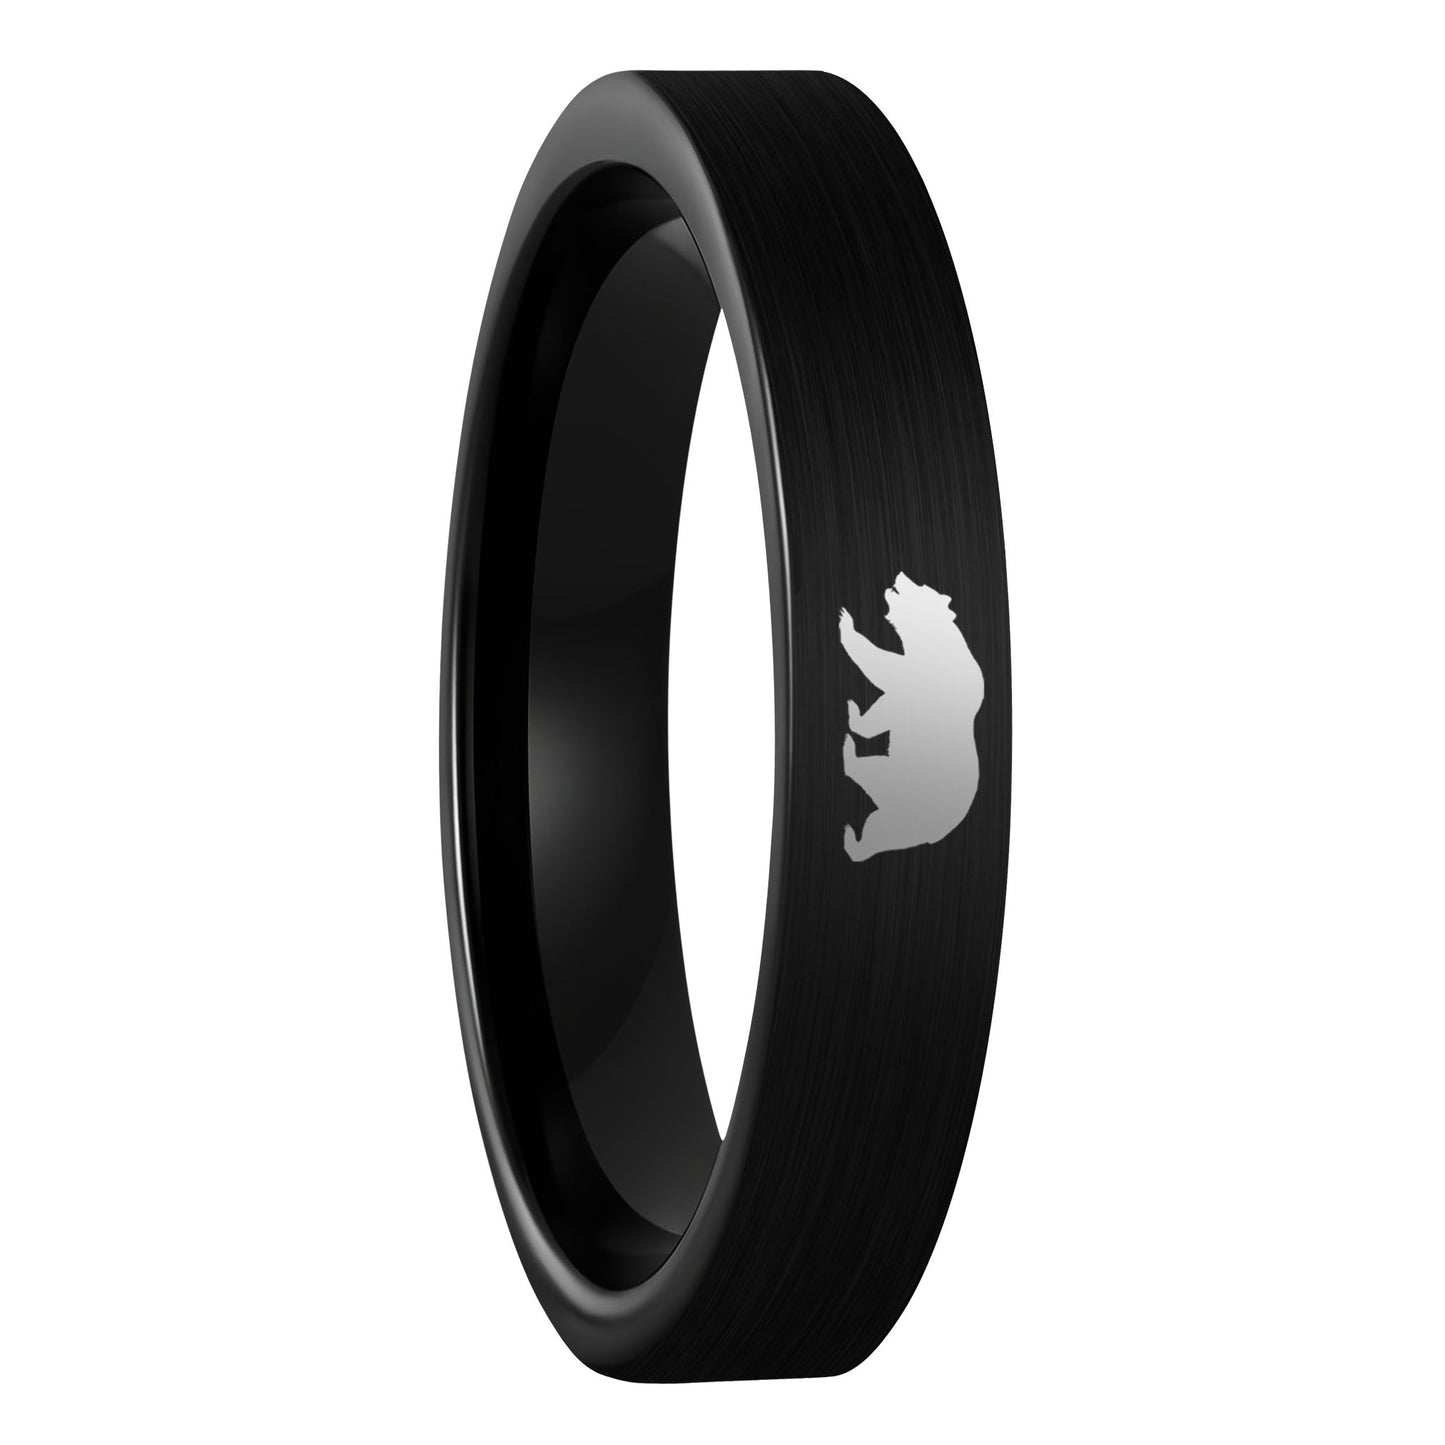 A bear brushed black tungsten women's wedding band displayed on a plain white background.